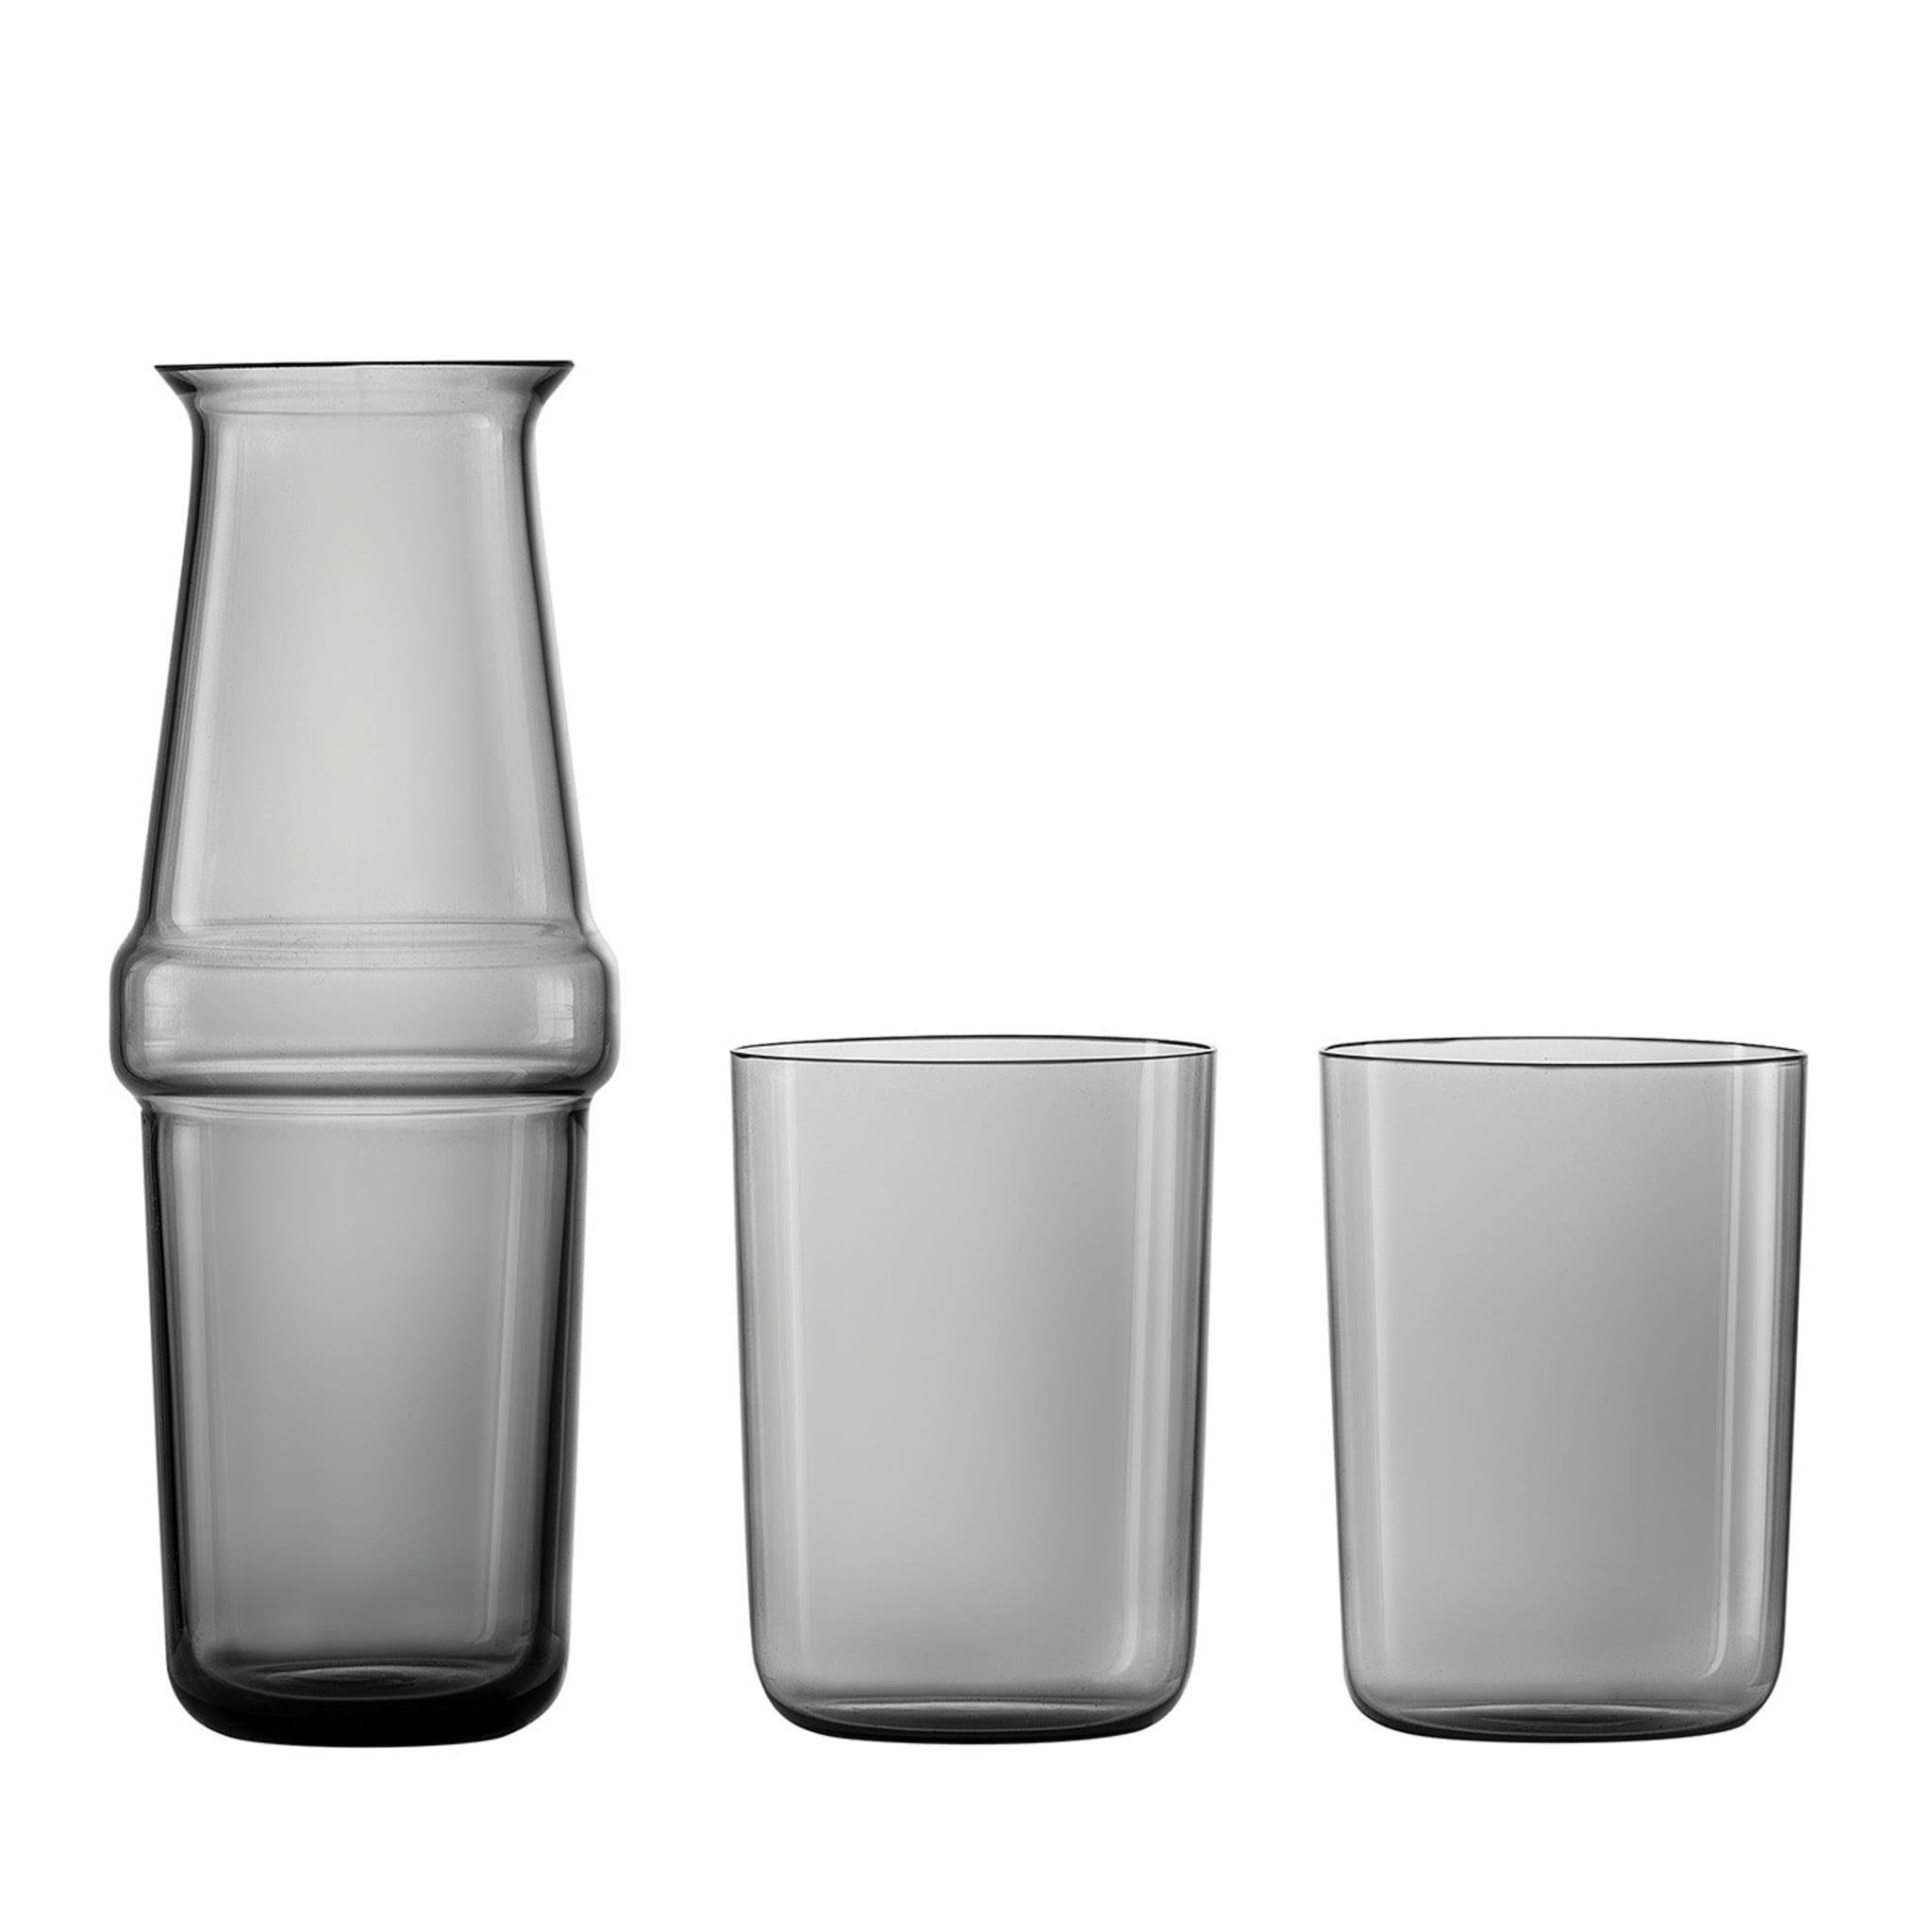 Trio F Set of Gray Pitcher and 2 Glasses by Marco Zito - Main view